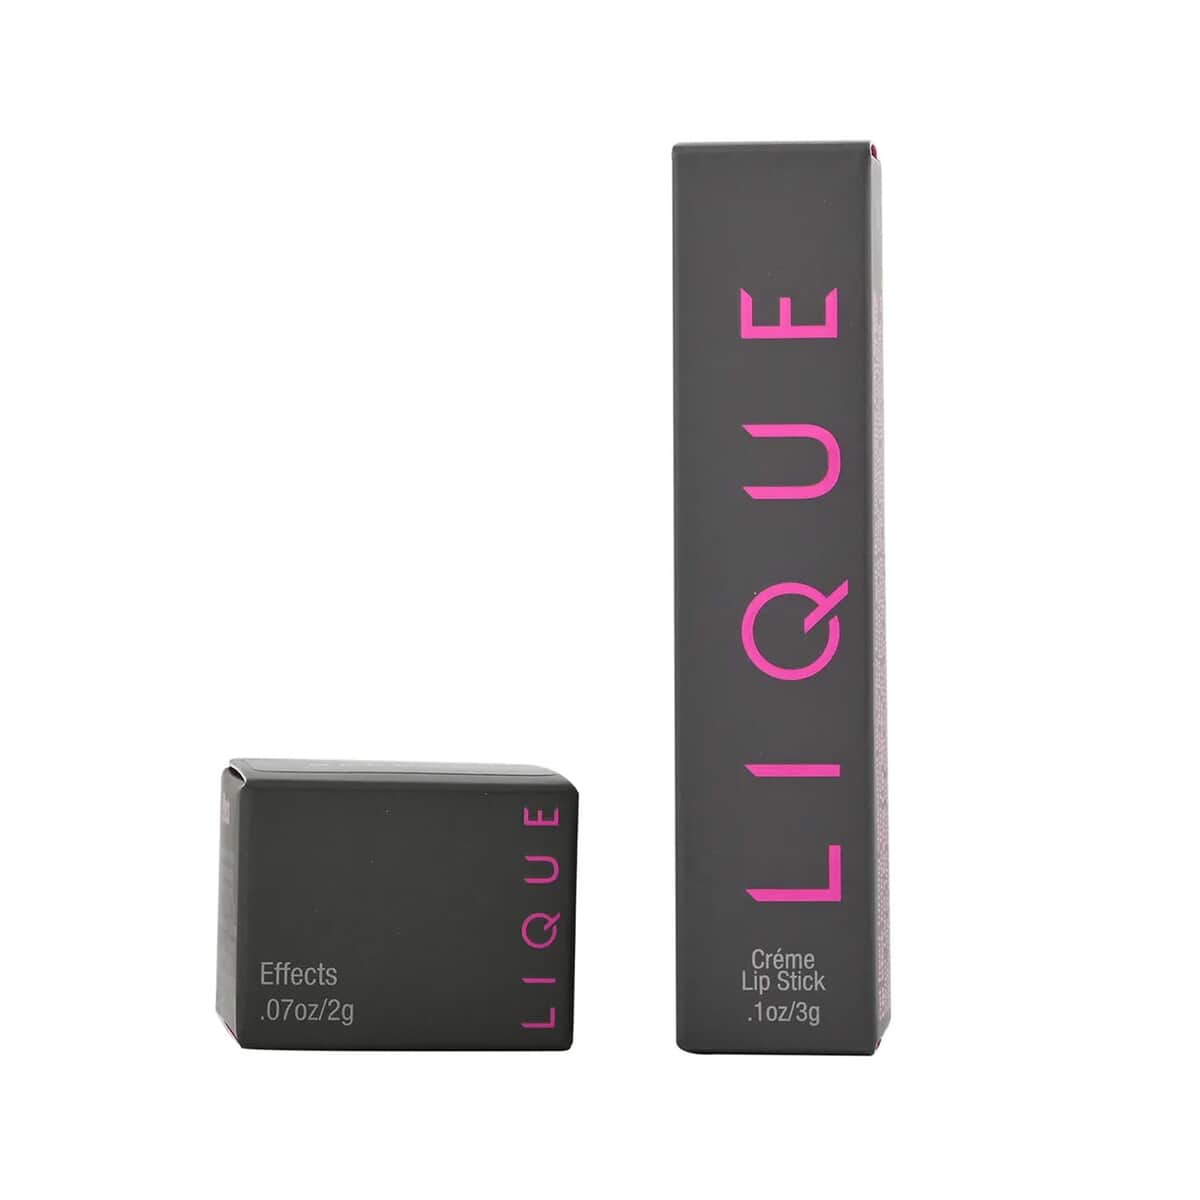 Closeout Lique Set of 2 (One Lipstick & One Effect Powder) with Free Set of 2 (One Lipstick & One Effect Powder) image number 6